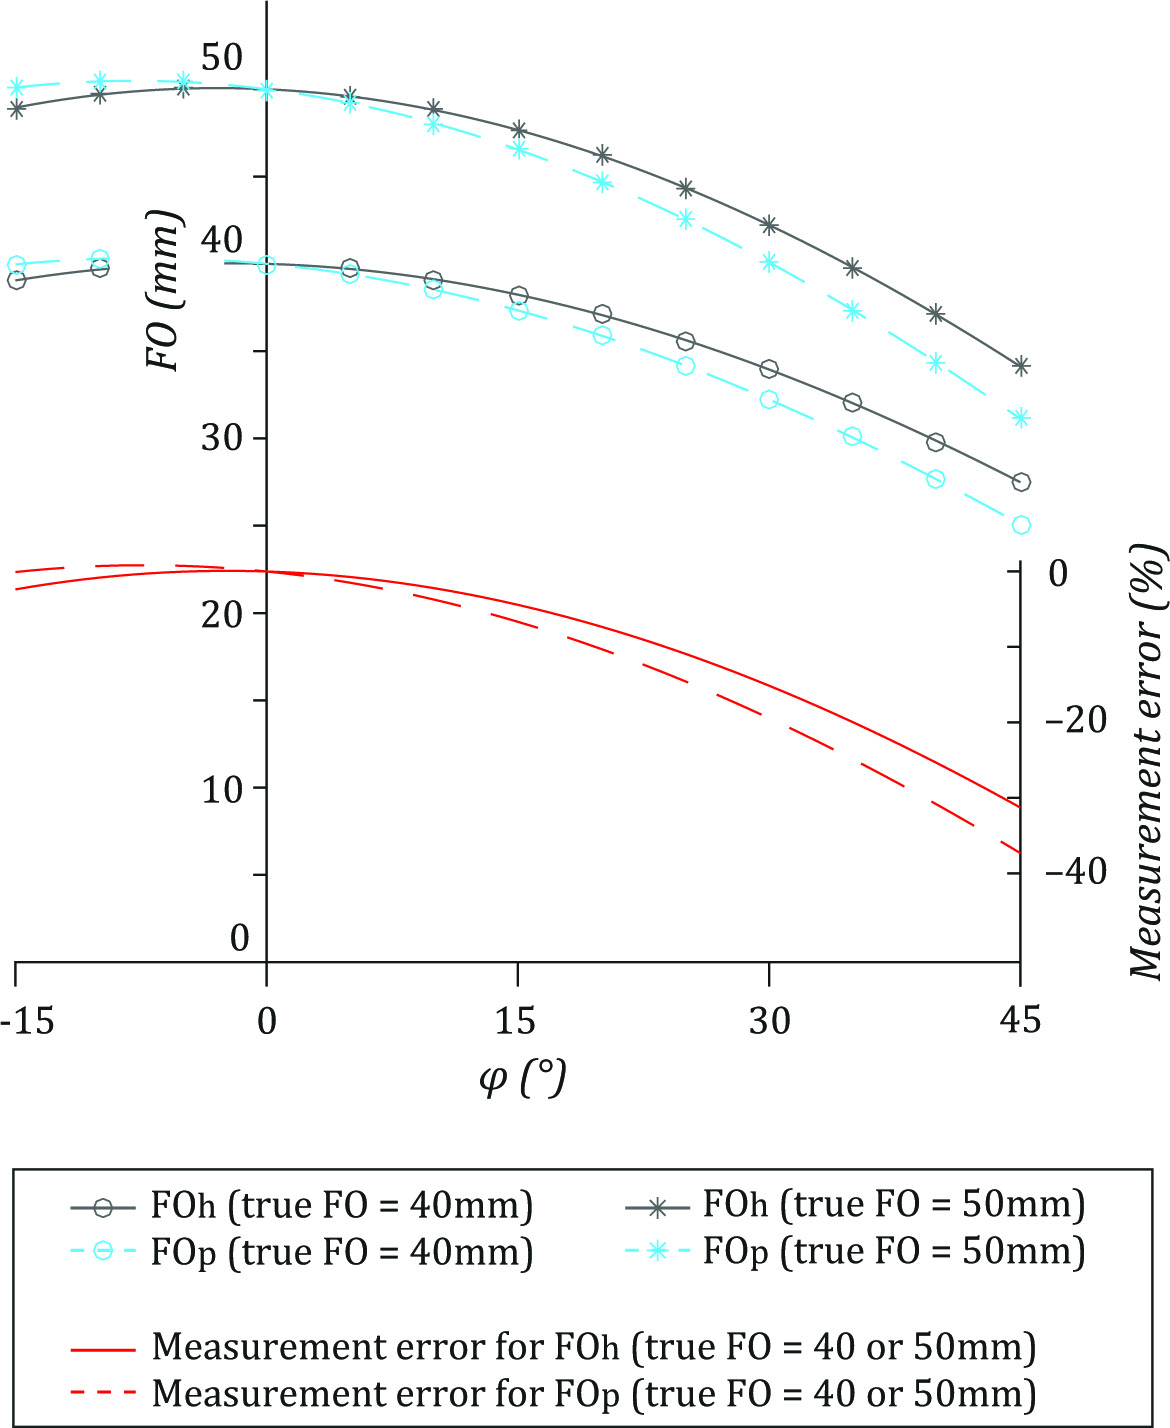 Fig. 7 
            Theoretical femoral offset (FO) on anteroposterior (AP) hip (FOh, grey) and AP pelvis (FOp, blue) radiographs as a function of femoral neck rotation (φ). The simulation was run twice for a true FO of 40 mm and 50 mm, respectively. The relative measurement error in % (y-axis on the right) was calculated for both simulations and found to be almost identical (only one curve is shown for clarity). There was a non-linear relationship between φ and projected FO. The larger φ was, the more the true FO was underestimated (represented by a negative measurement error).
          